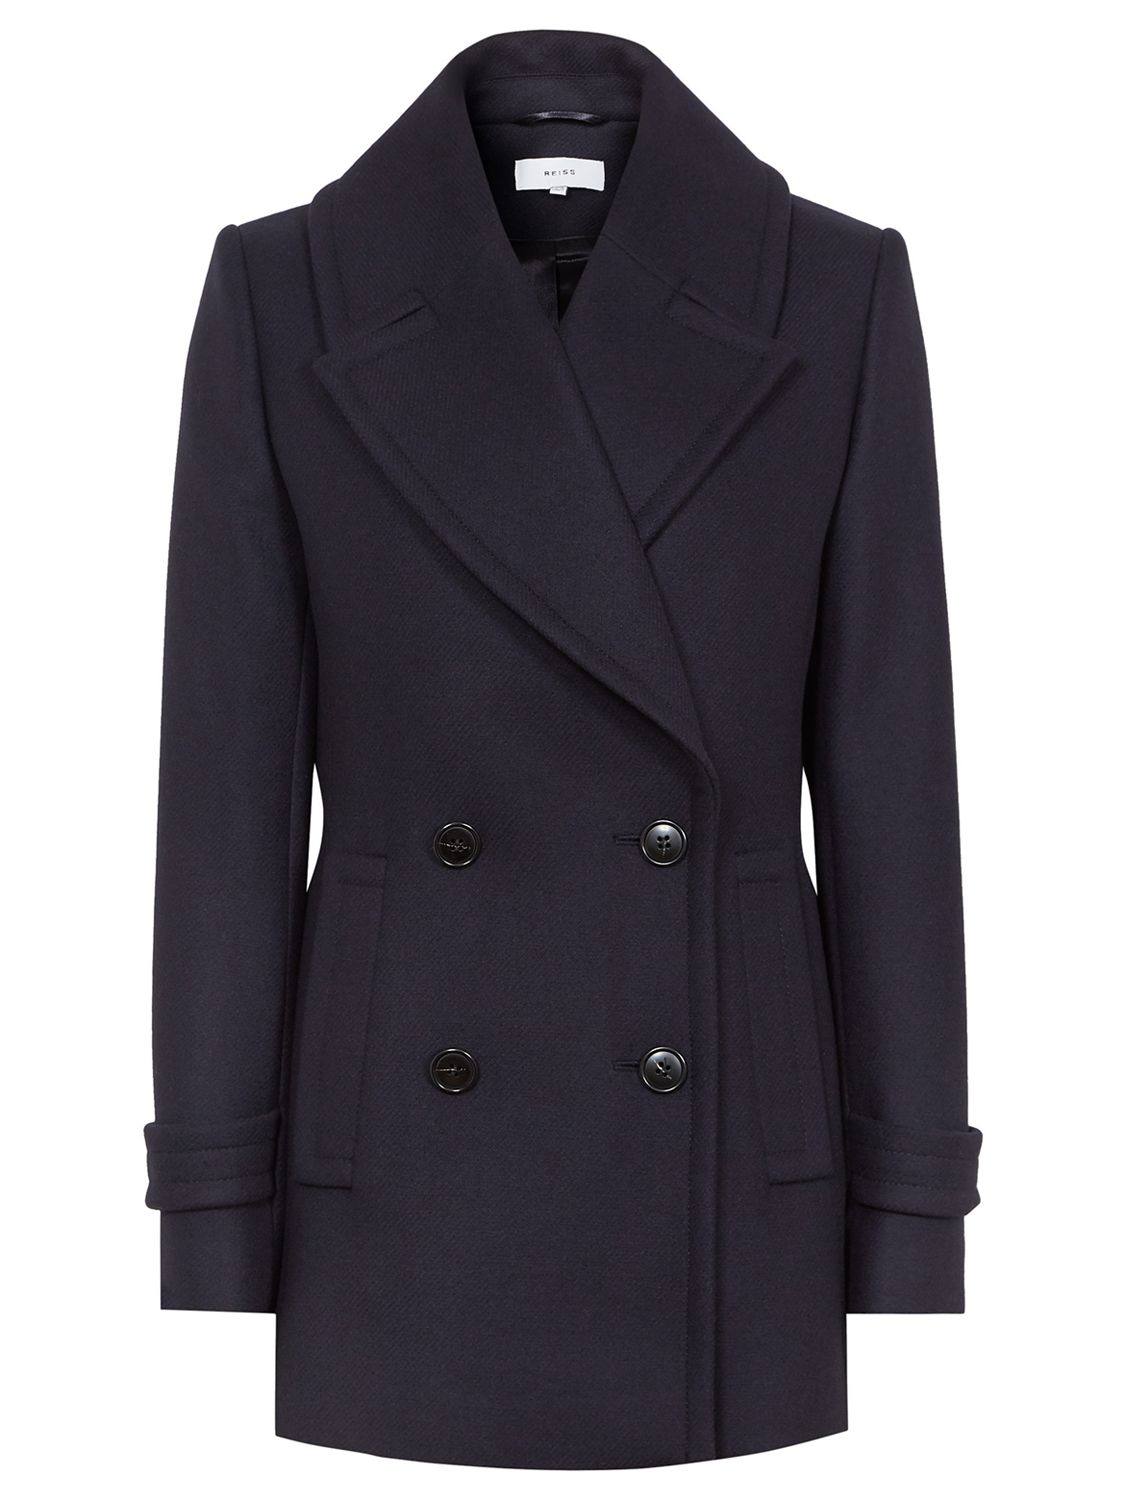 Reiss Malia Double Breasted Wool Blend Pea Coat, Night Navy